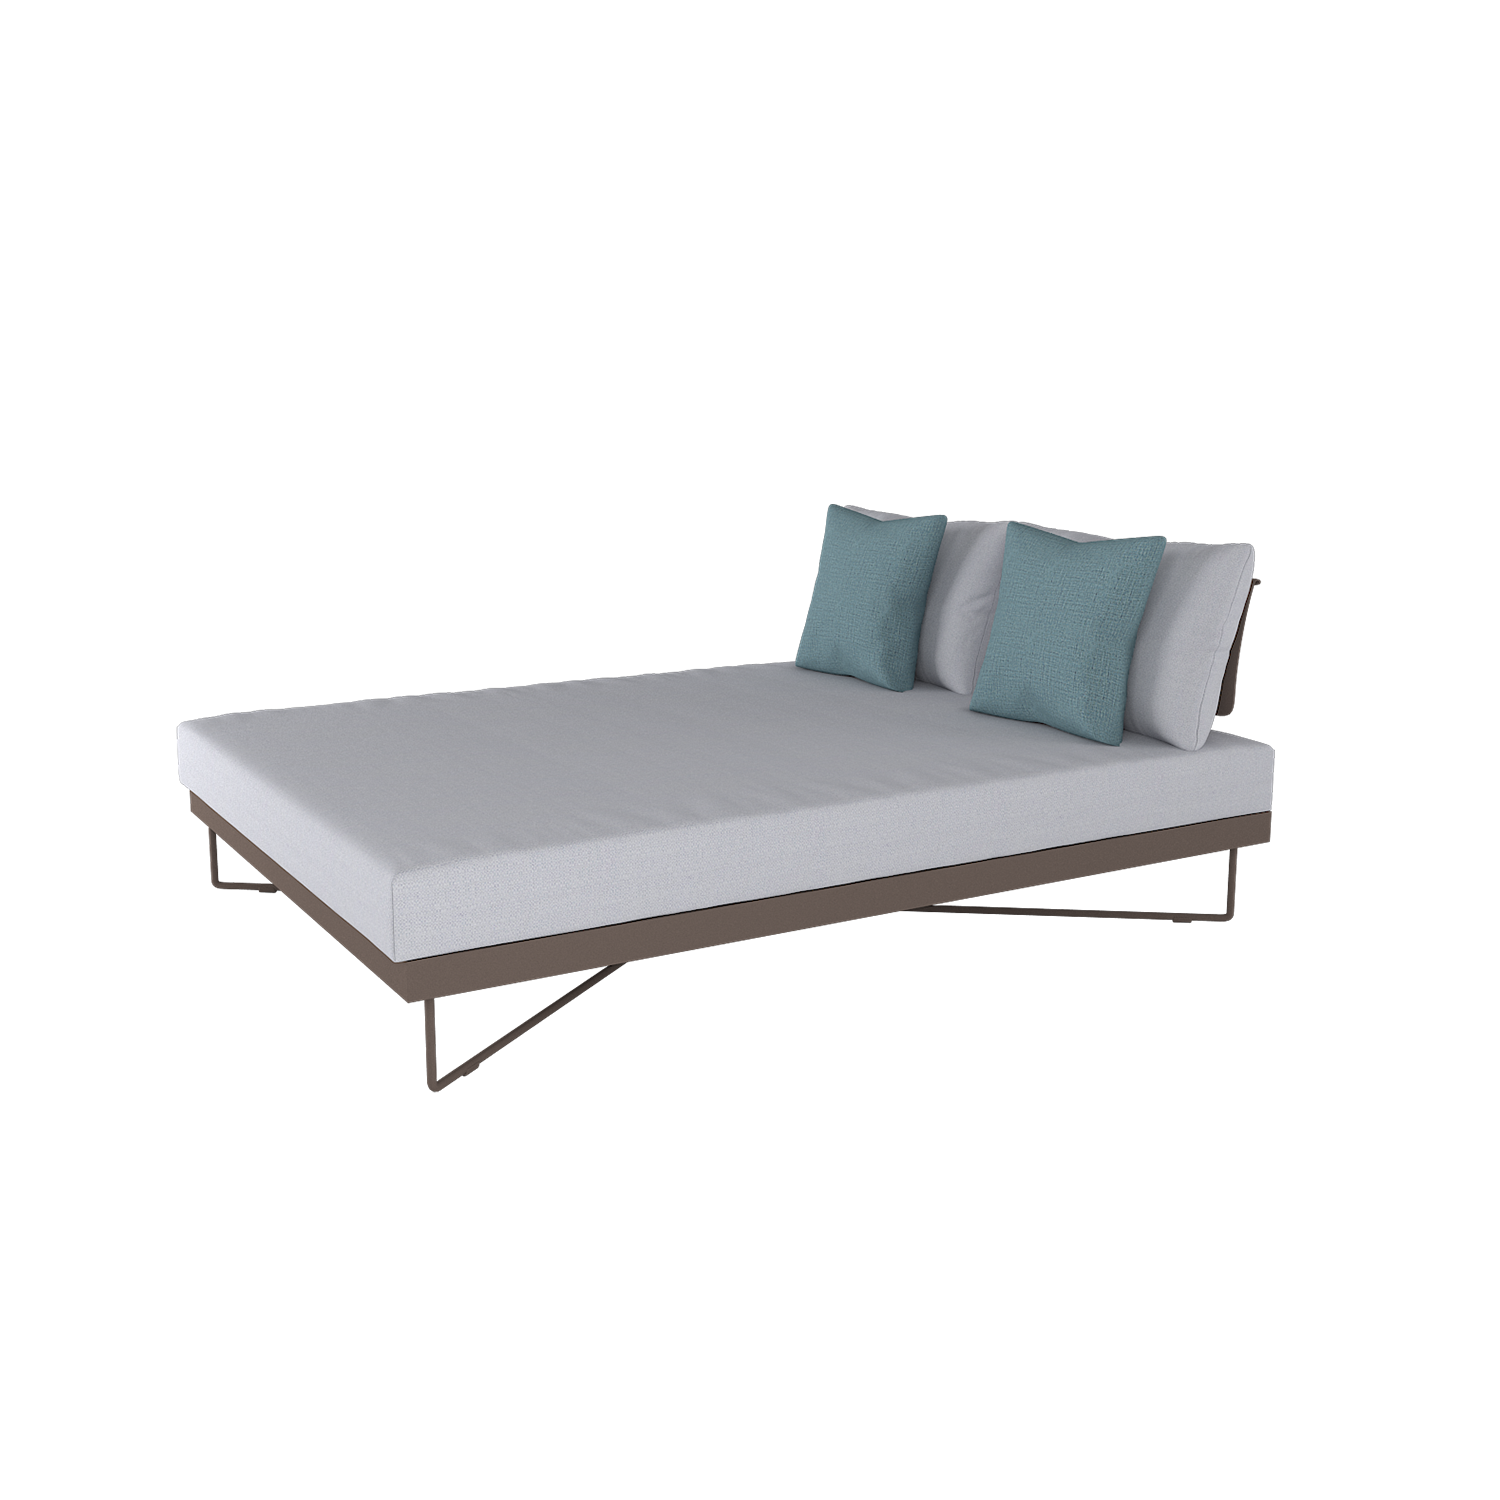 Coral Reef Outdoor Double Sunlounger with Aluminum Back | Roberti | Outdoor Lounge chairs | coral-reef-outdoor-double-sunlounger-2